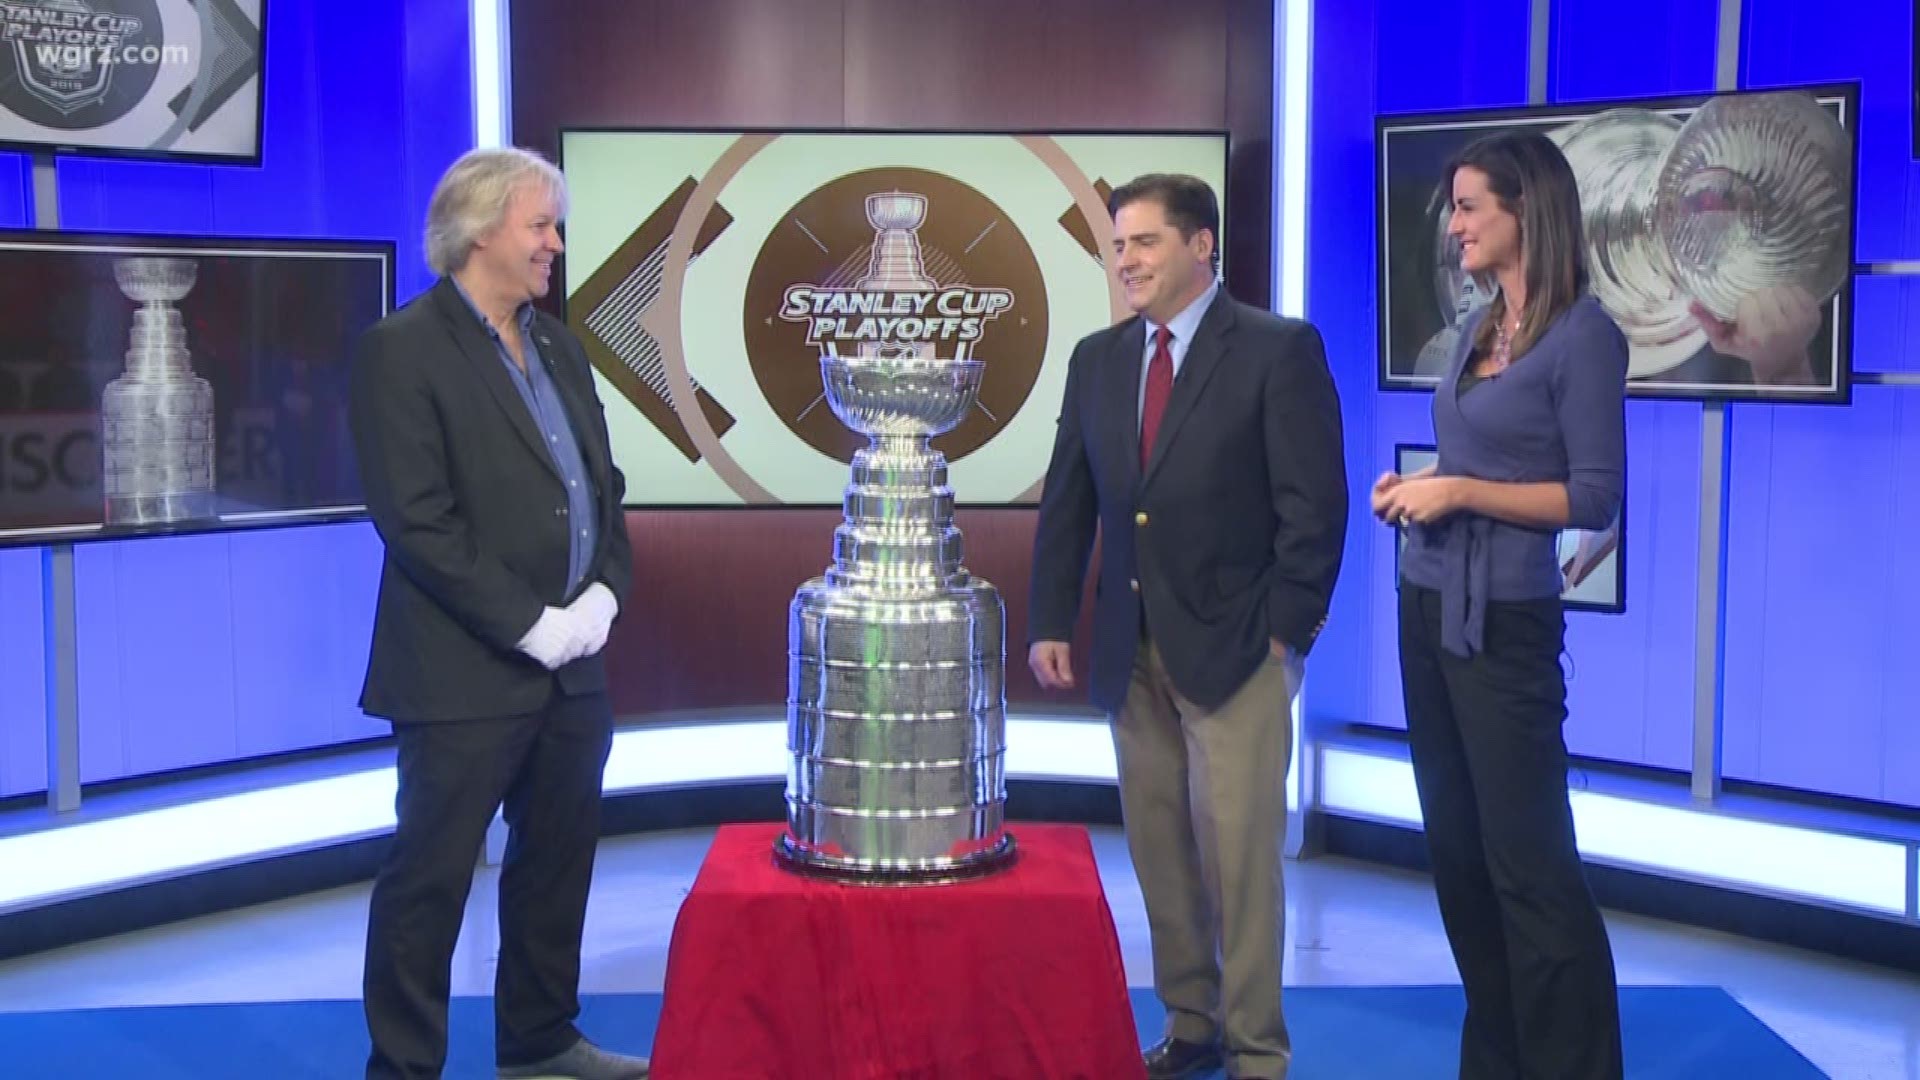 The Keeper of the Cup stopped by our studio Tuesday morning to share the coveted championship trophy and its stories with us